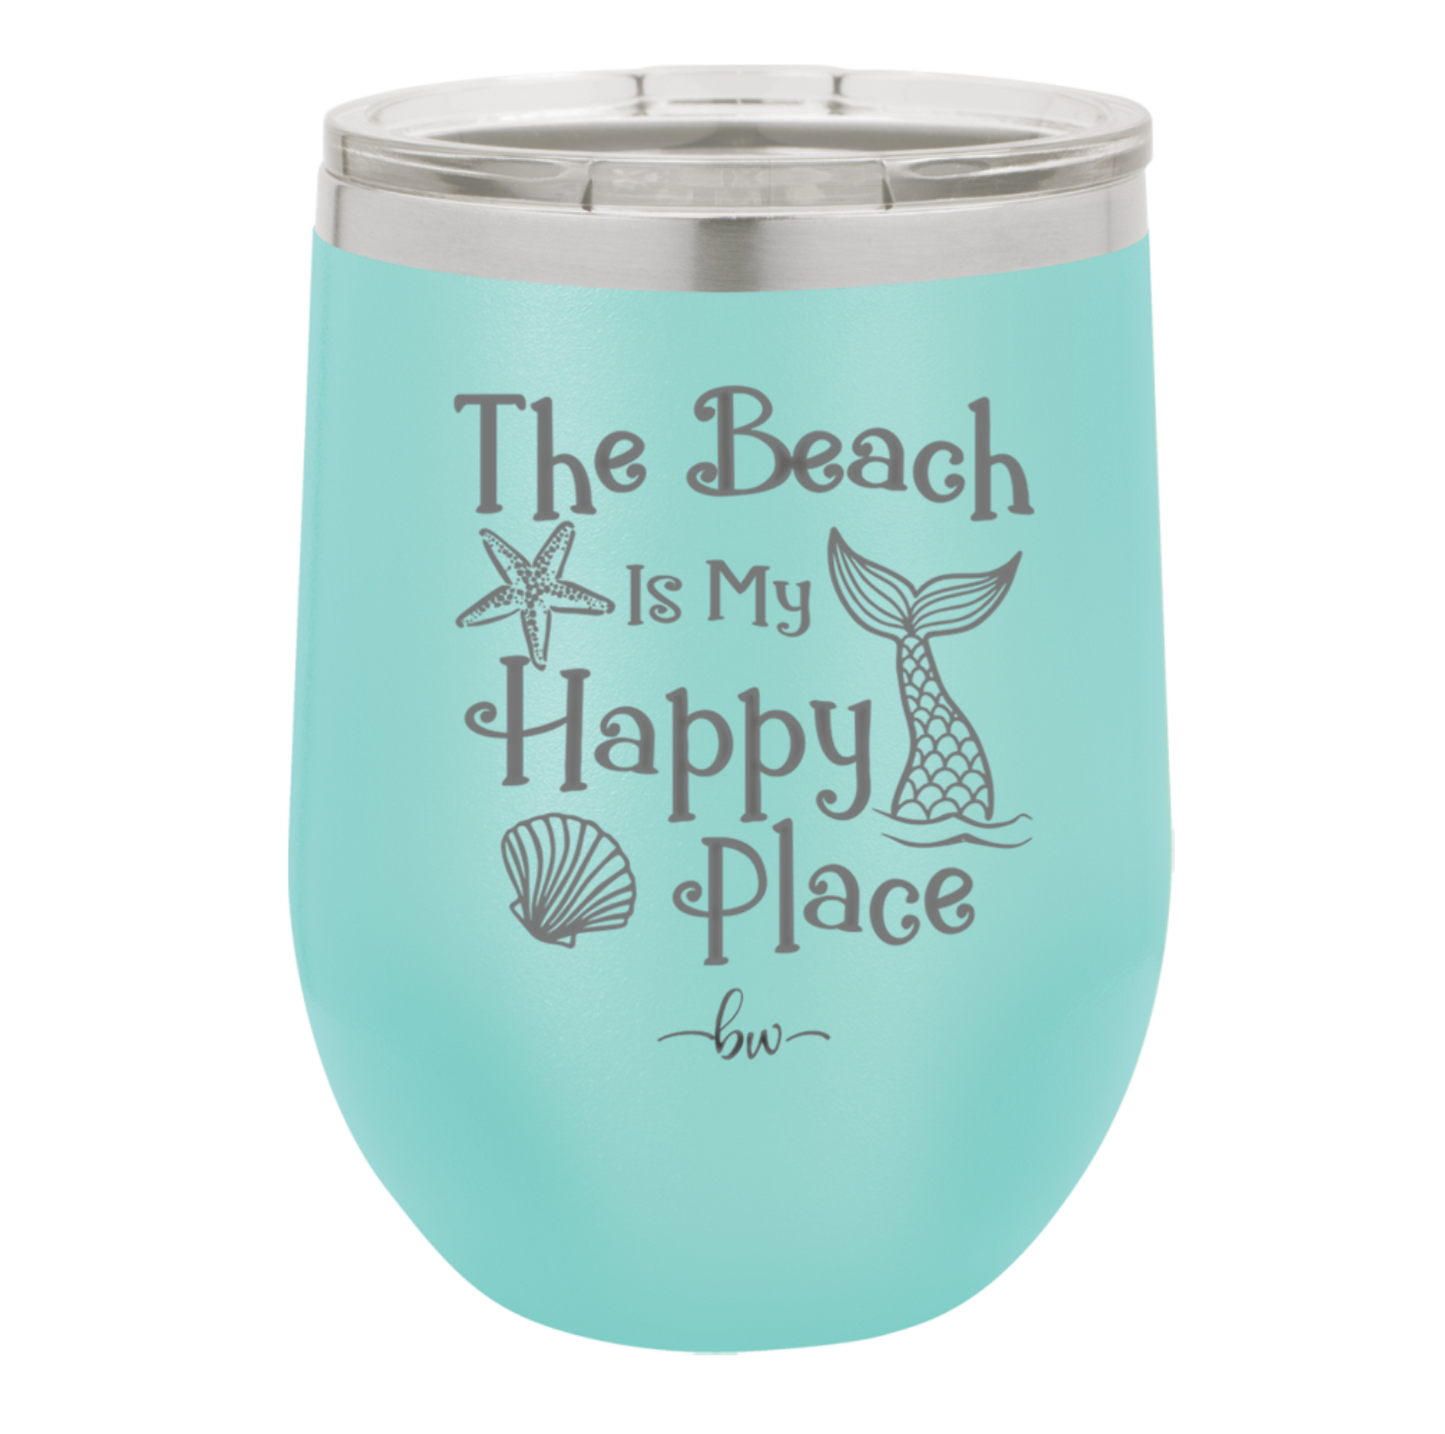 The Beach is My Happy Place - Laser Engraved Stainless Steel Drinkware - 1101 -